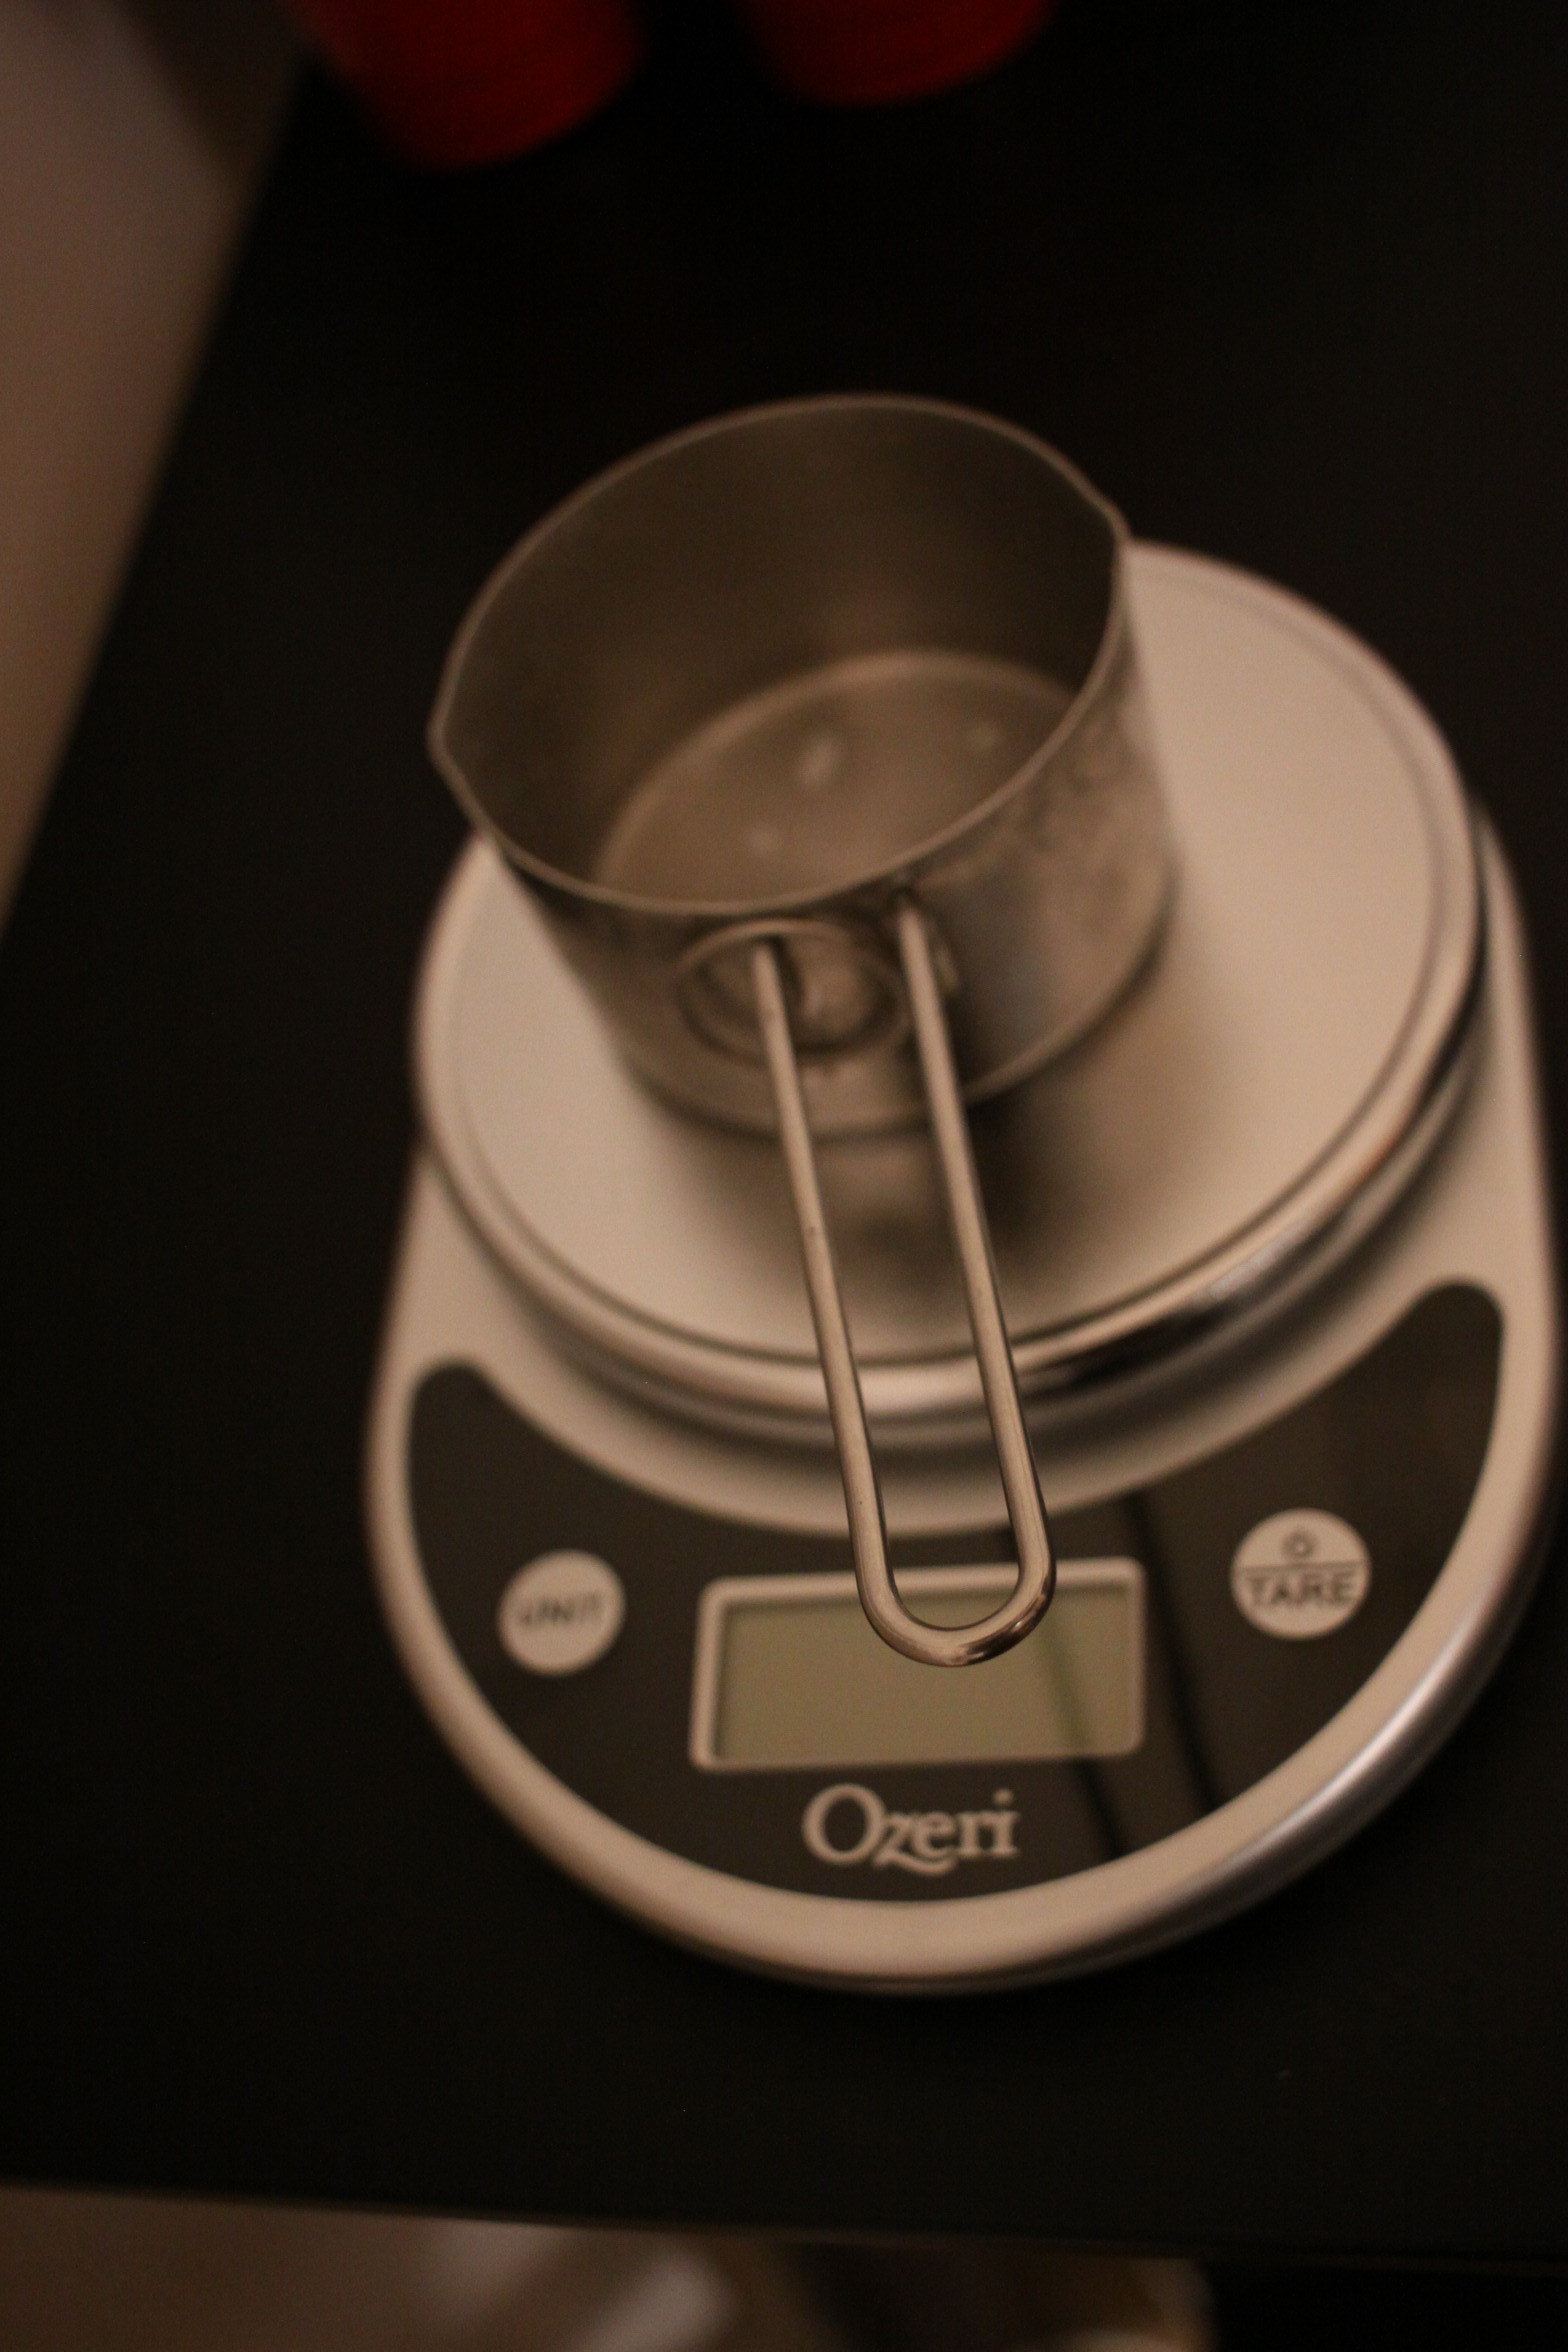 Cup measuring spoon on a measuring scale.